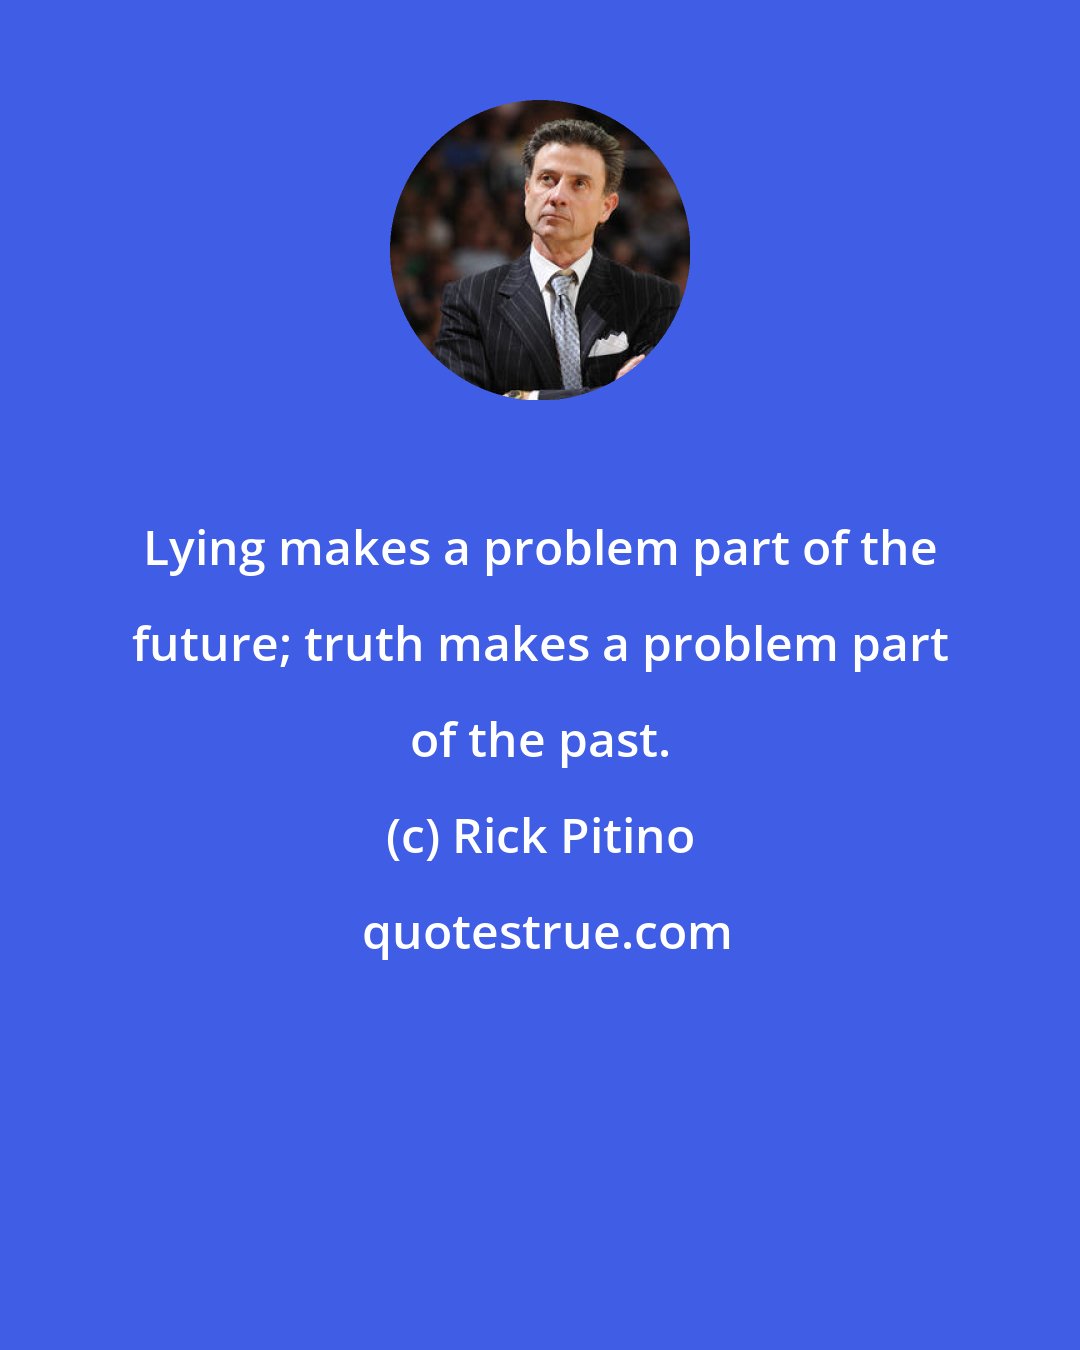 Rick Pitino: Lying makes a problem part of the future; truth makes a problem part of the past.